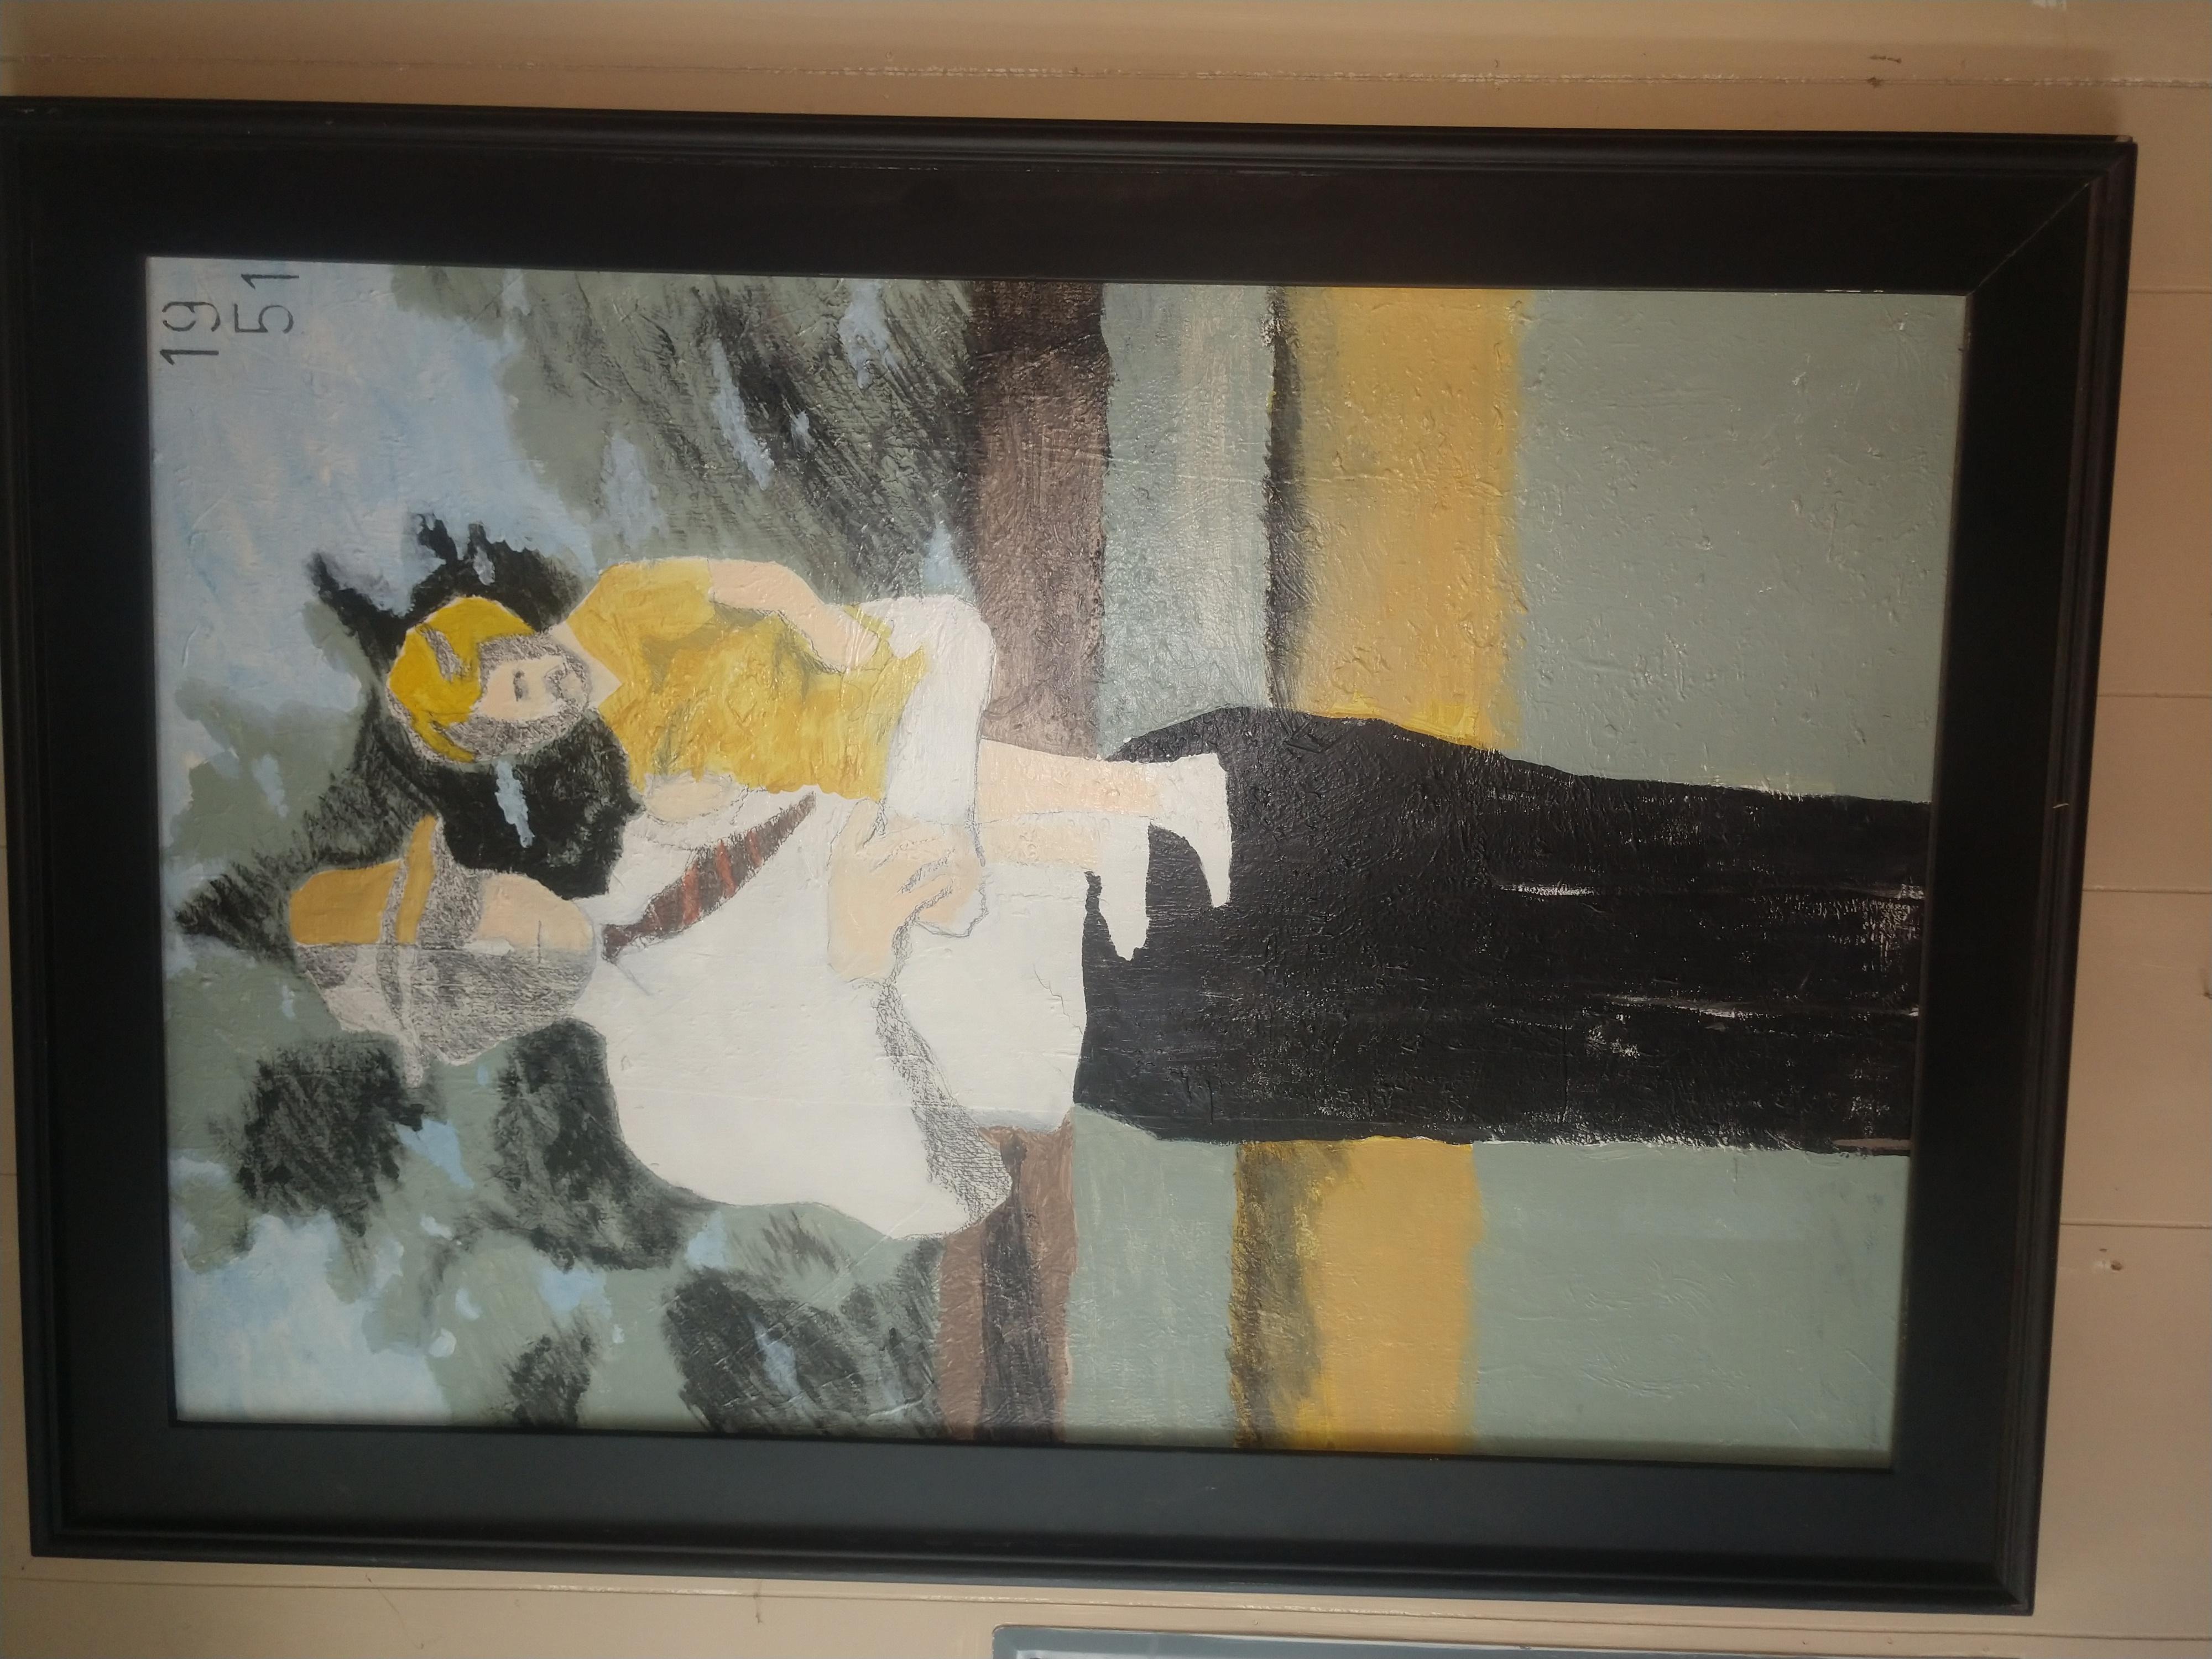 Fabulous modernist Painting by Randy Harter New York Artist. Father with child in muted tones. Framed size is 30 x 42.